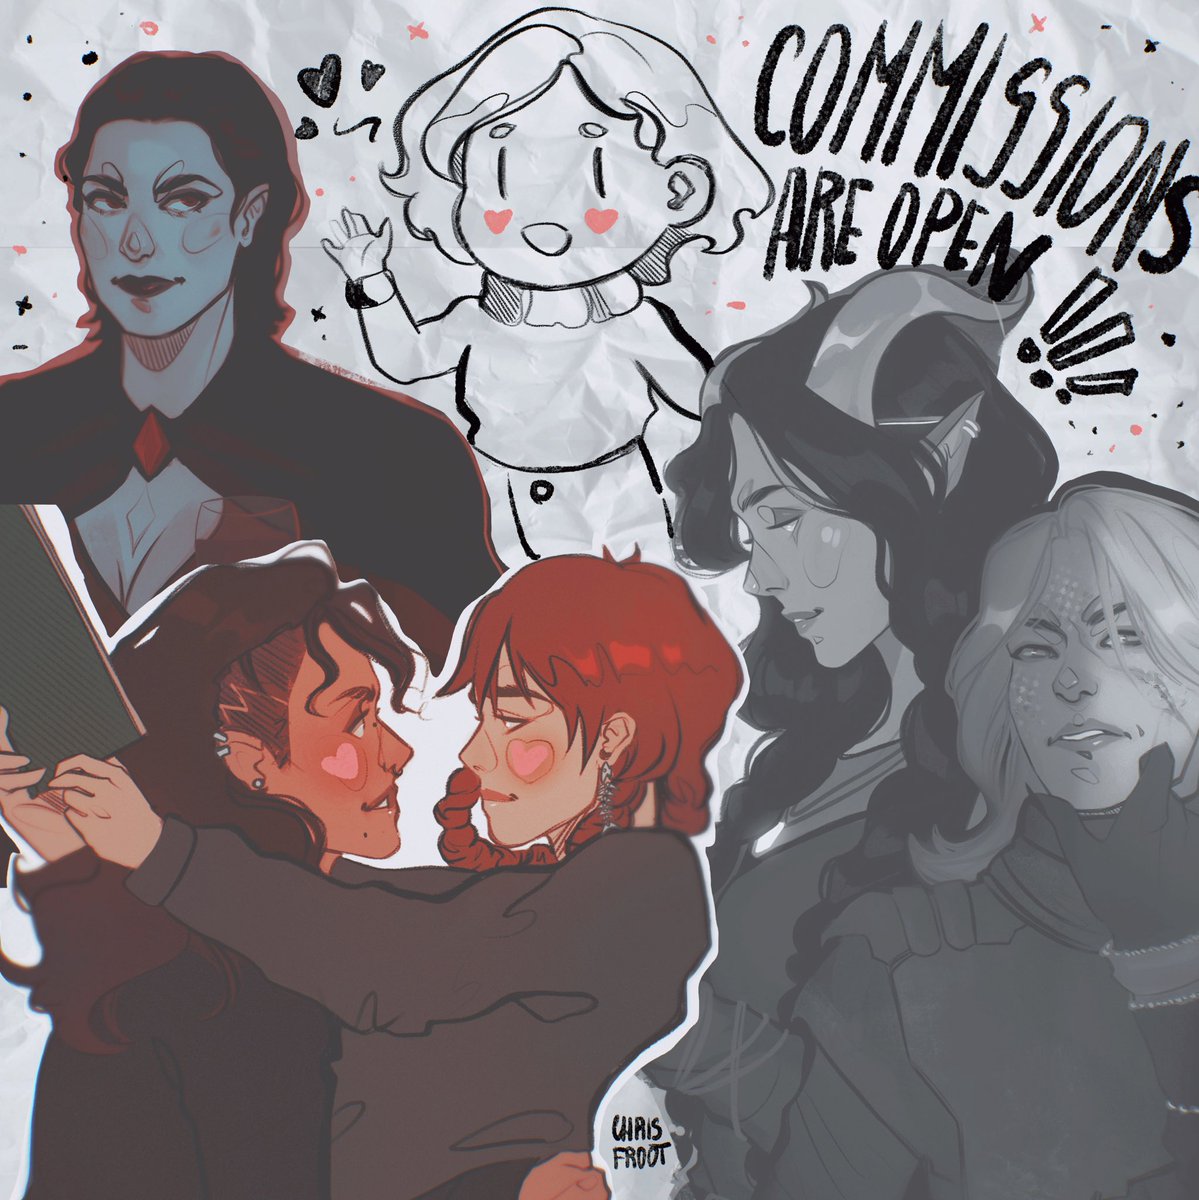 s’up! commissions are open! feel free to text to me or ask about the commission! ~ I draw different stuff: dnd, original characters, fandoms etc. u are welcome! and thank u! :] #commissionart #commission #commsopen #commsinfo